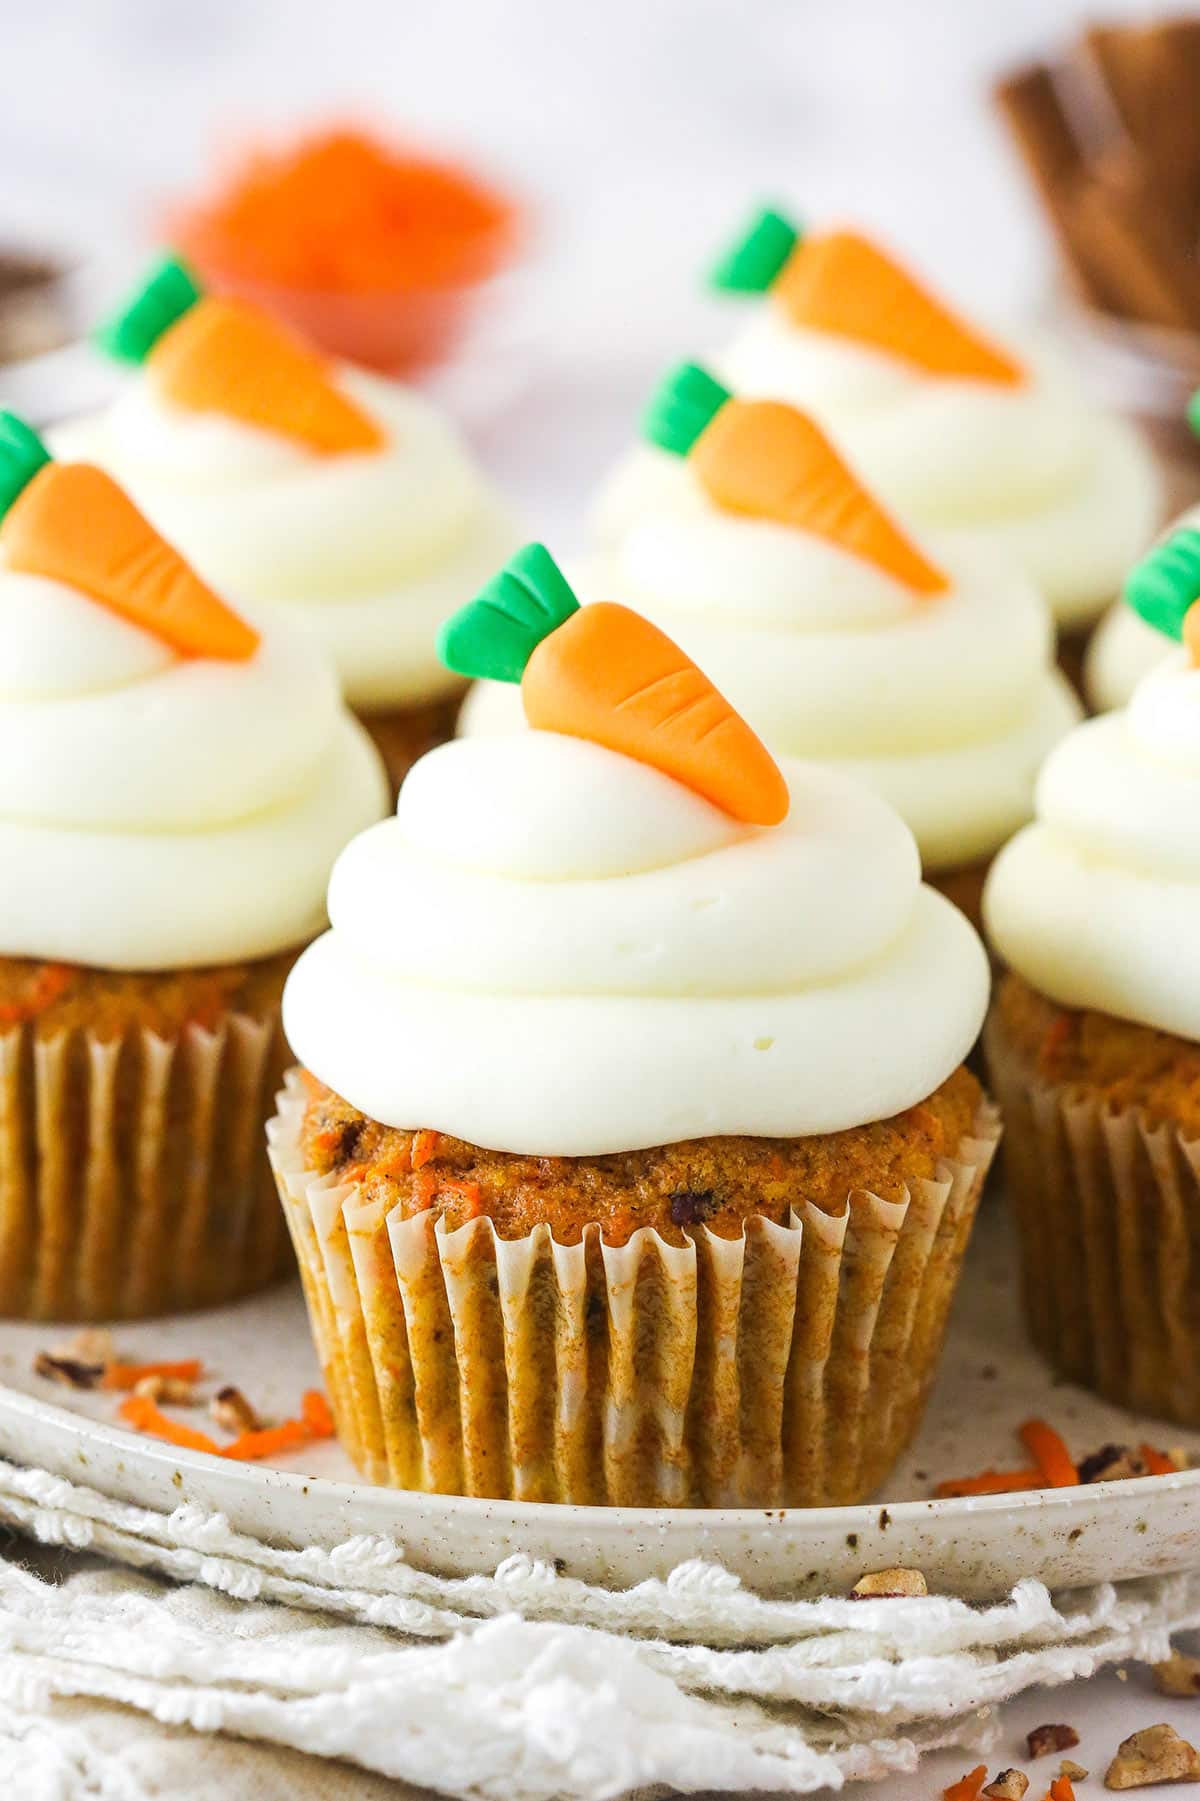 Carrot cake cupcakes on a serving platter topped with mini carrot toppers.